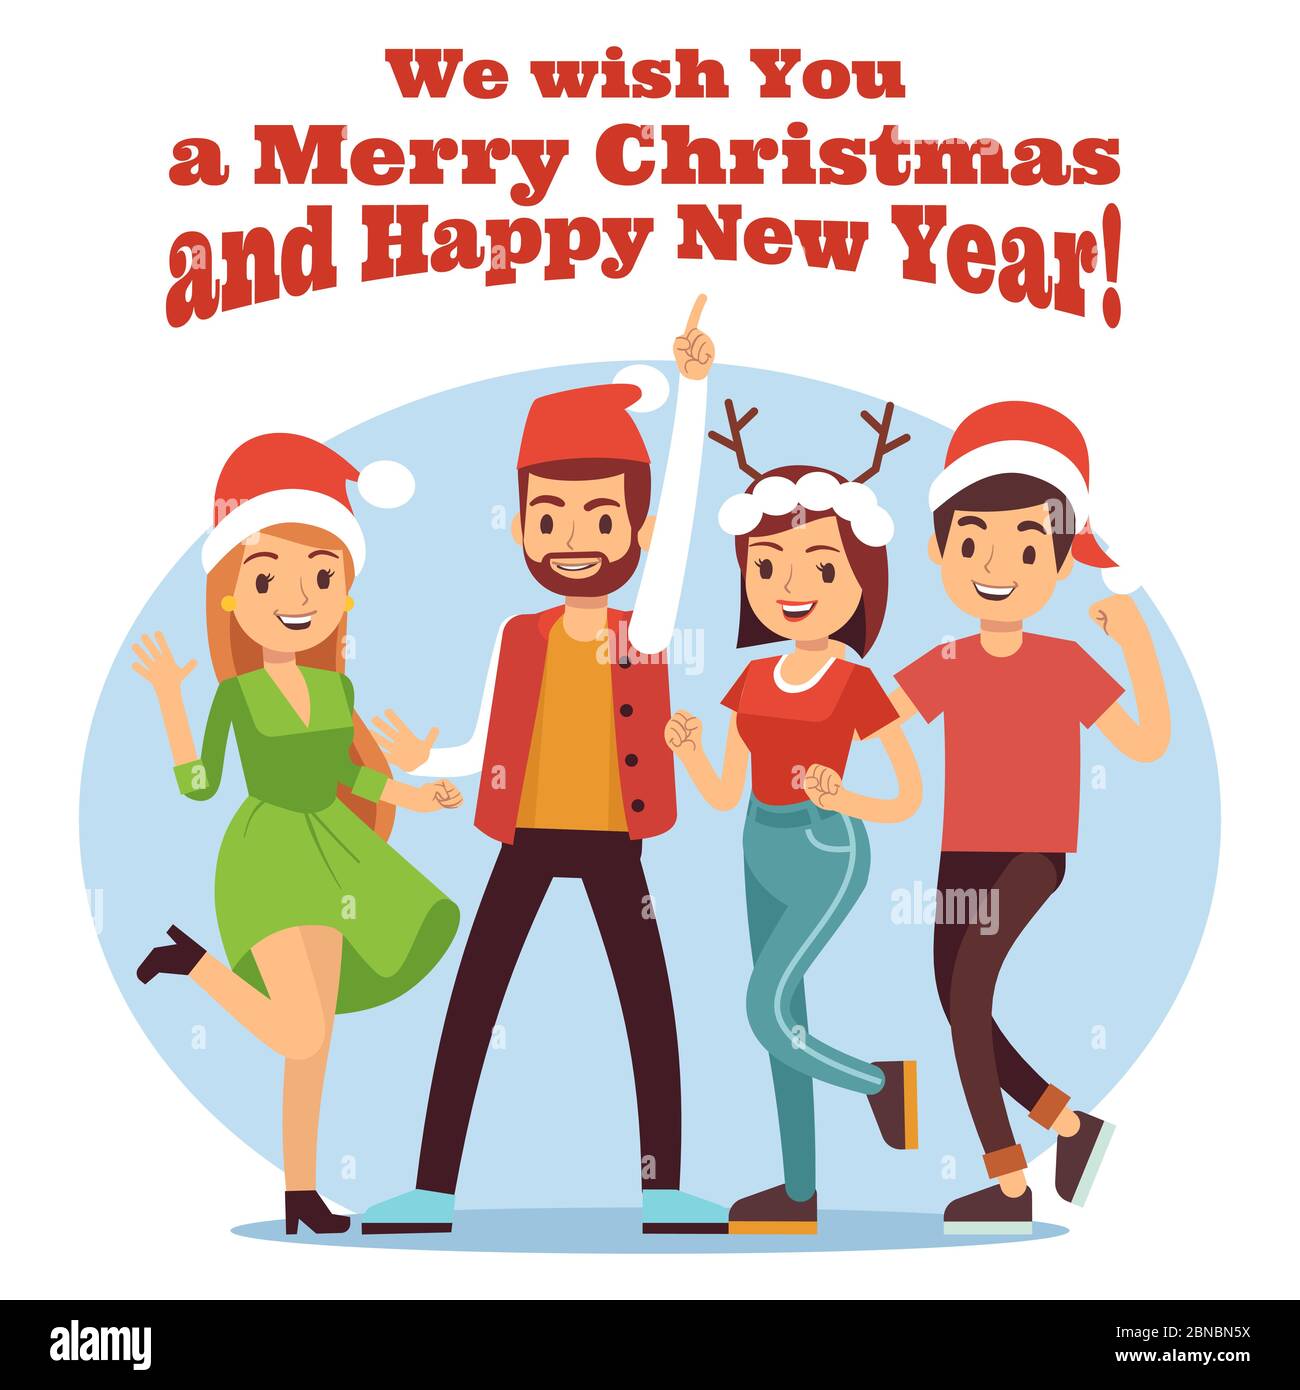 Friends celebrate Christmas. Merry Christmas and New Year party with happy cartoon girls and boys illustration vector Stock Vector